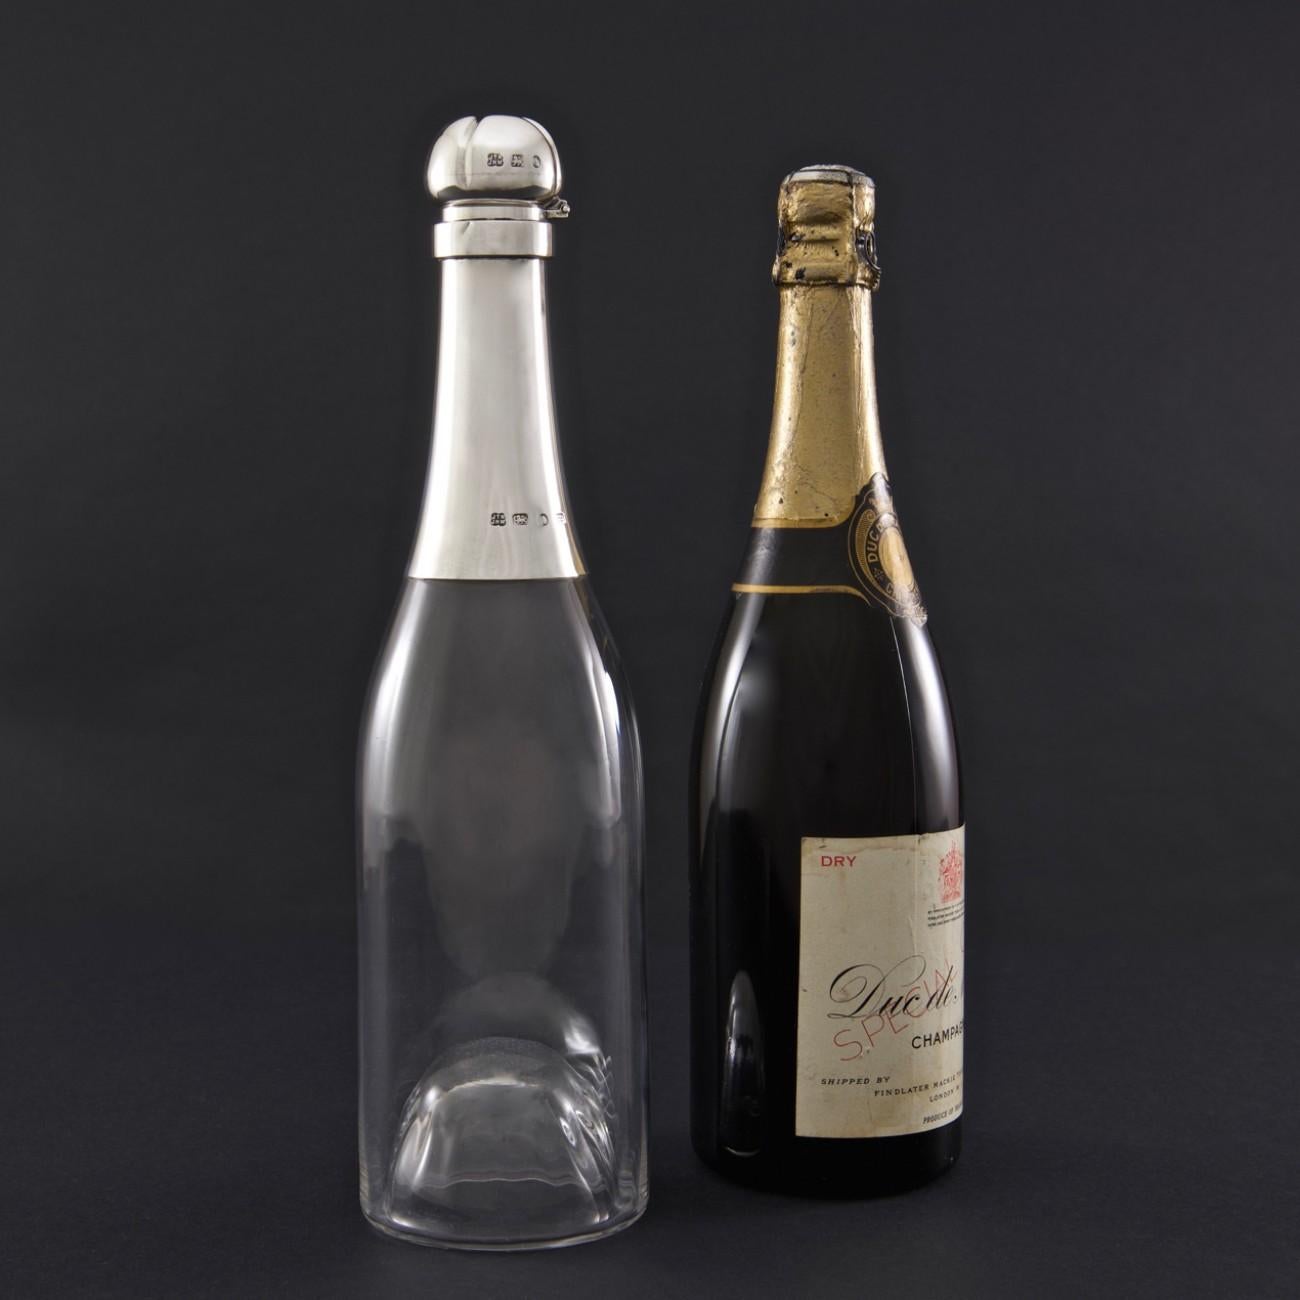 Wonderful decanter with a bottle capacity, modelled as a Champagne bottle. The glass body is fluted, but in a truly elegant fashion, on the inside only; so that the outside surface of the decanter remains smooth. The silver neck and hinged stopper